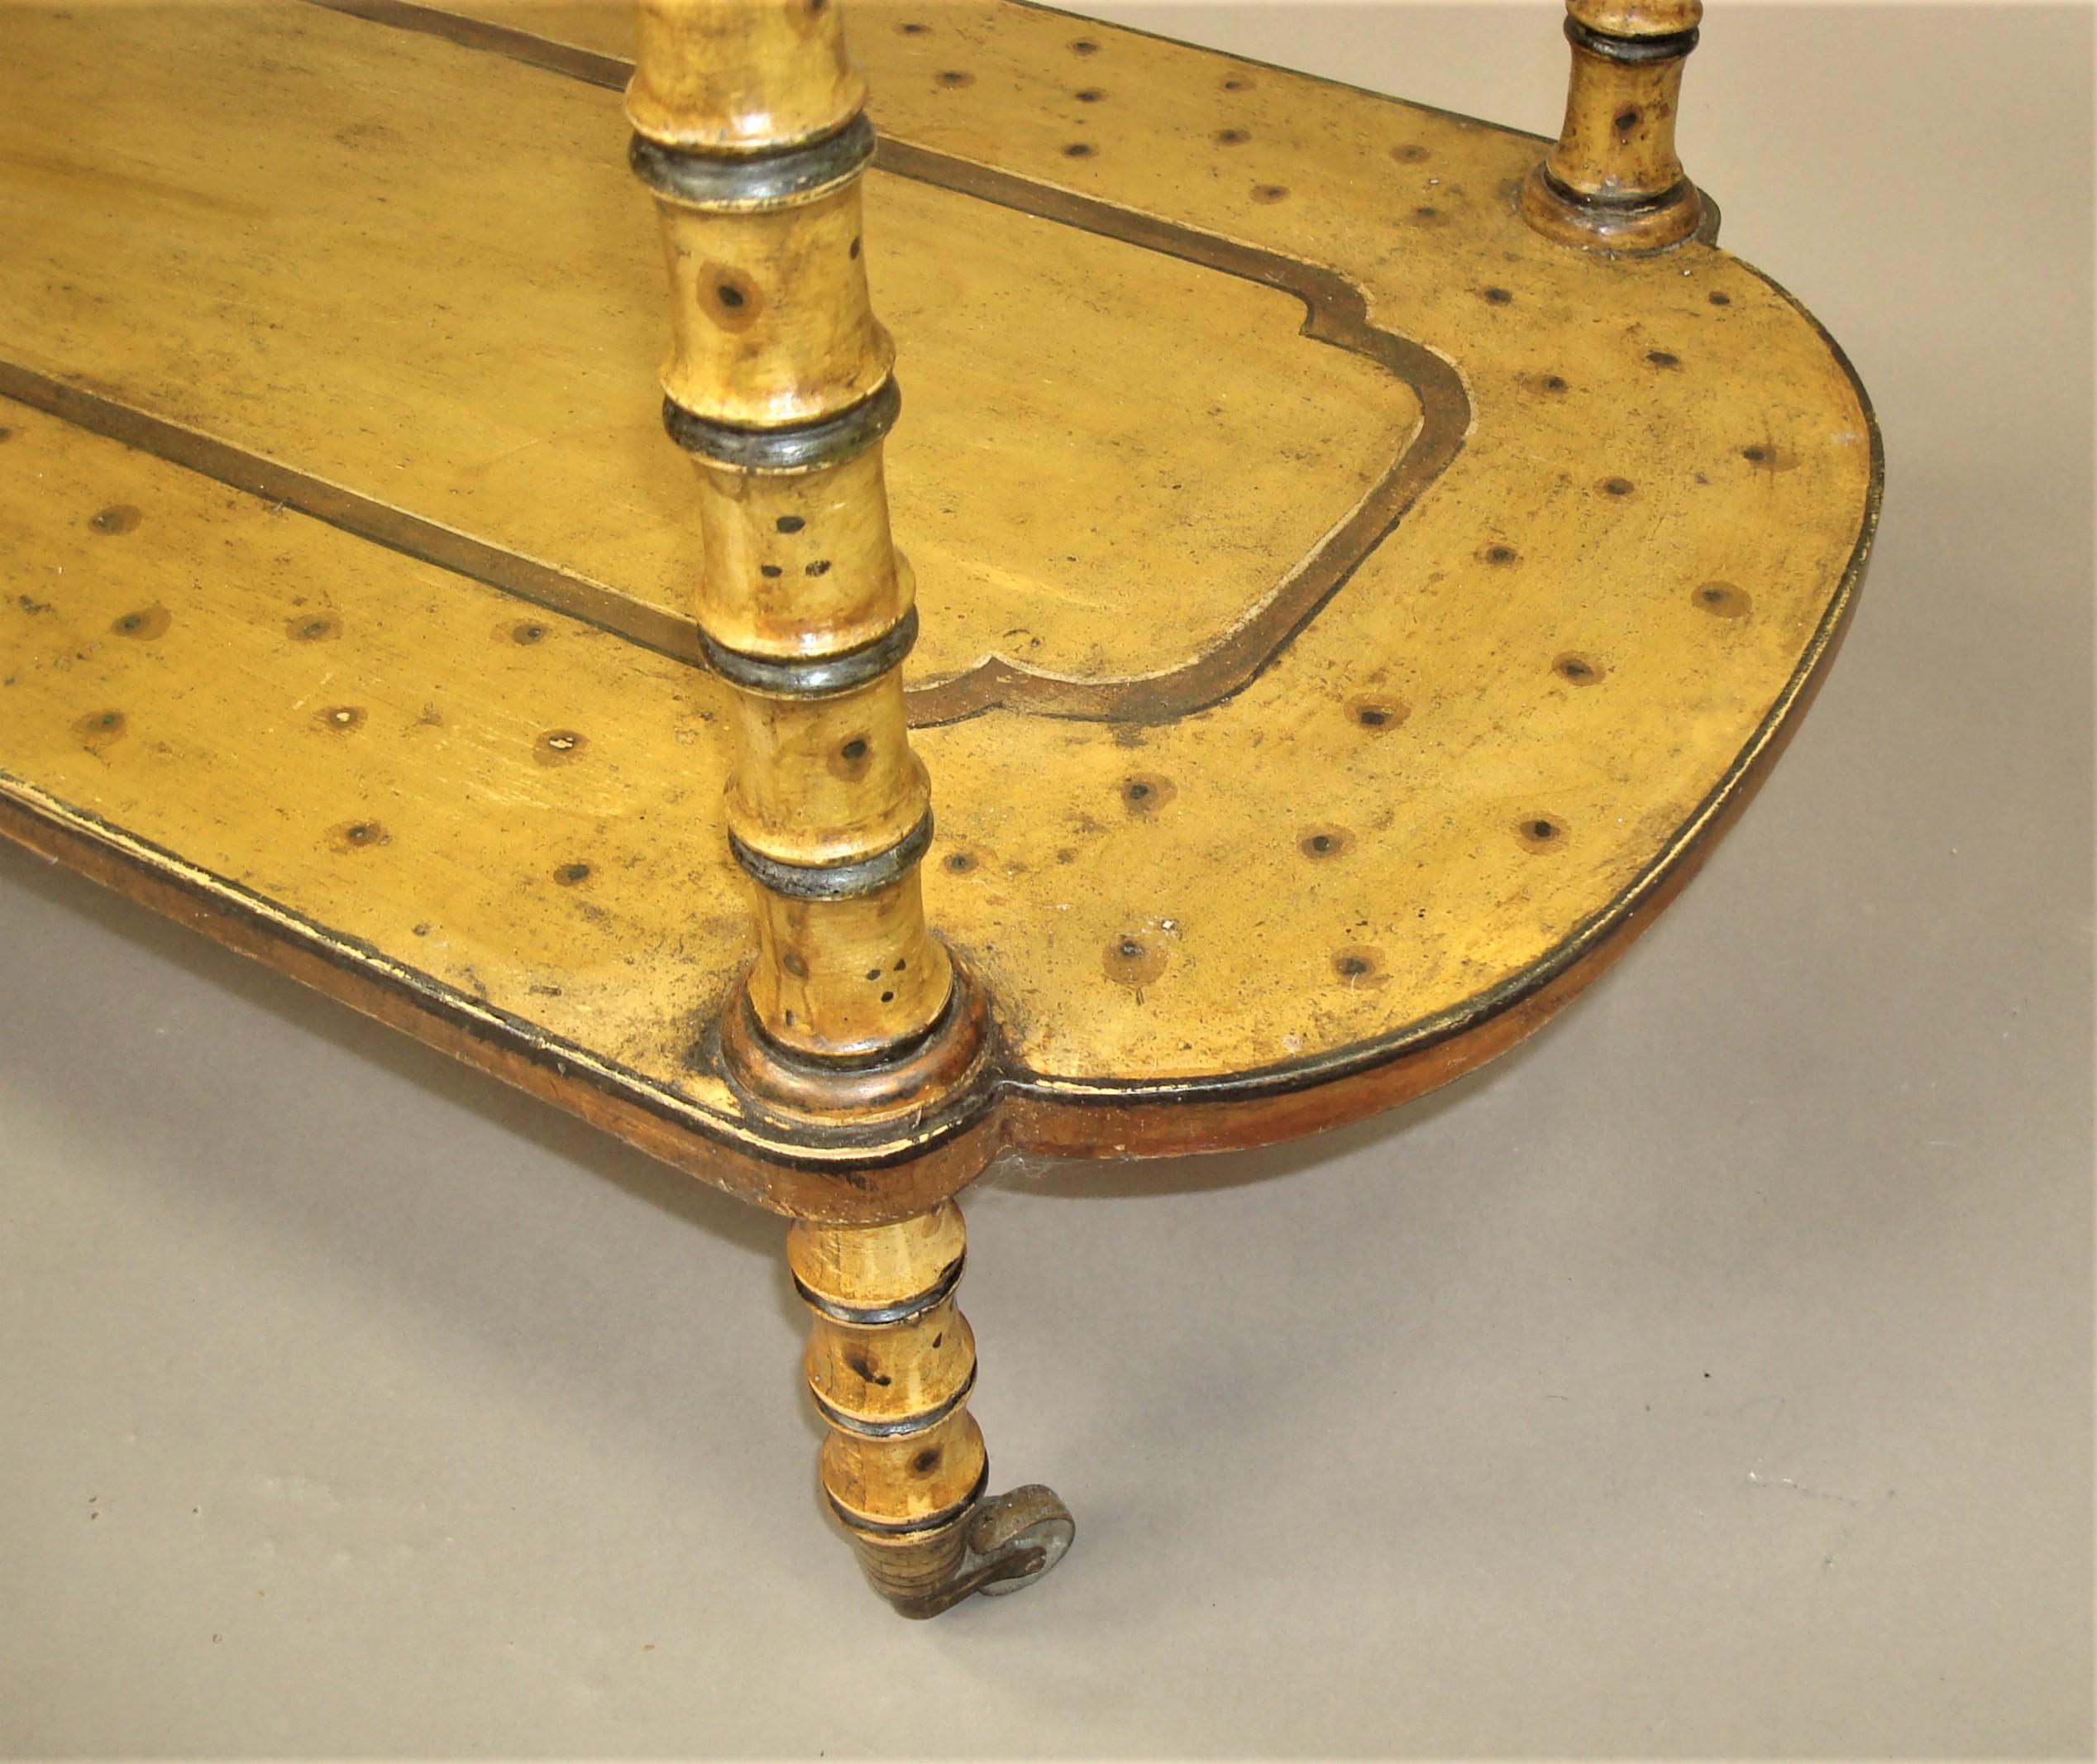 Regency Painted Faux Bamboo Centre Table or Occasional Table In Good Condition For Sale In Moreton-in-Marsh, Gloucestershire